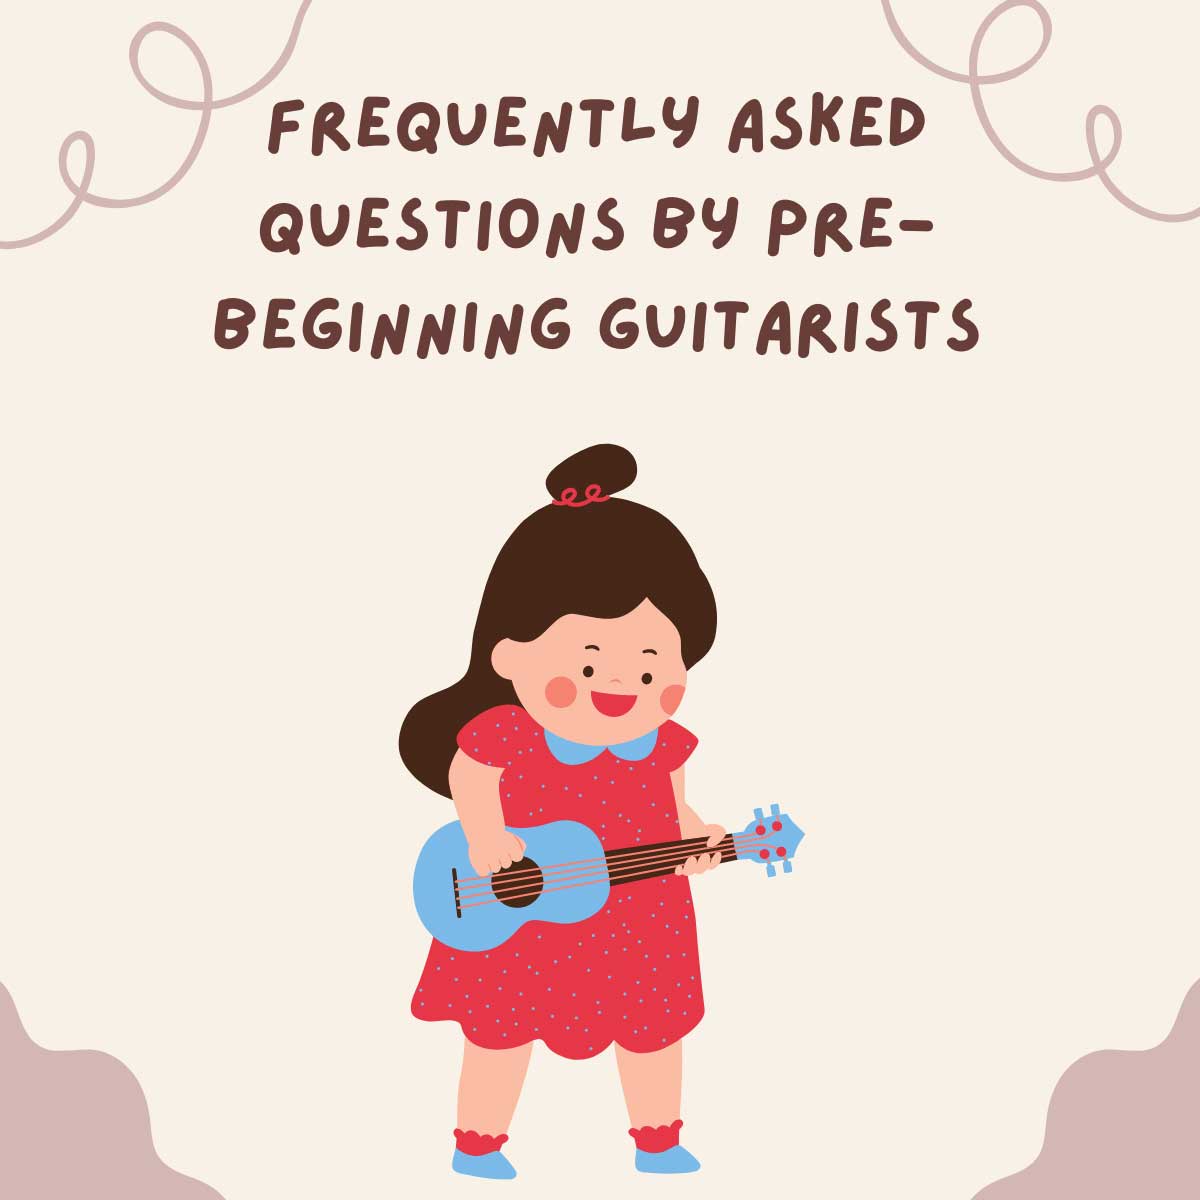 Frequently Asked Questions by Pre-Beginning Guitarists